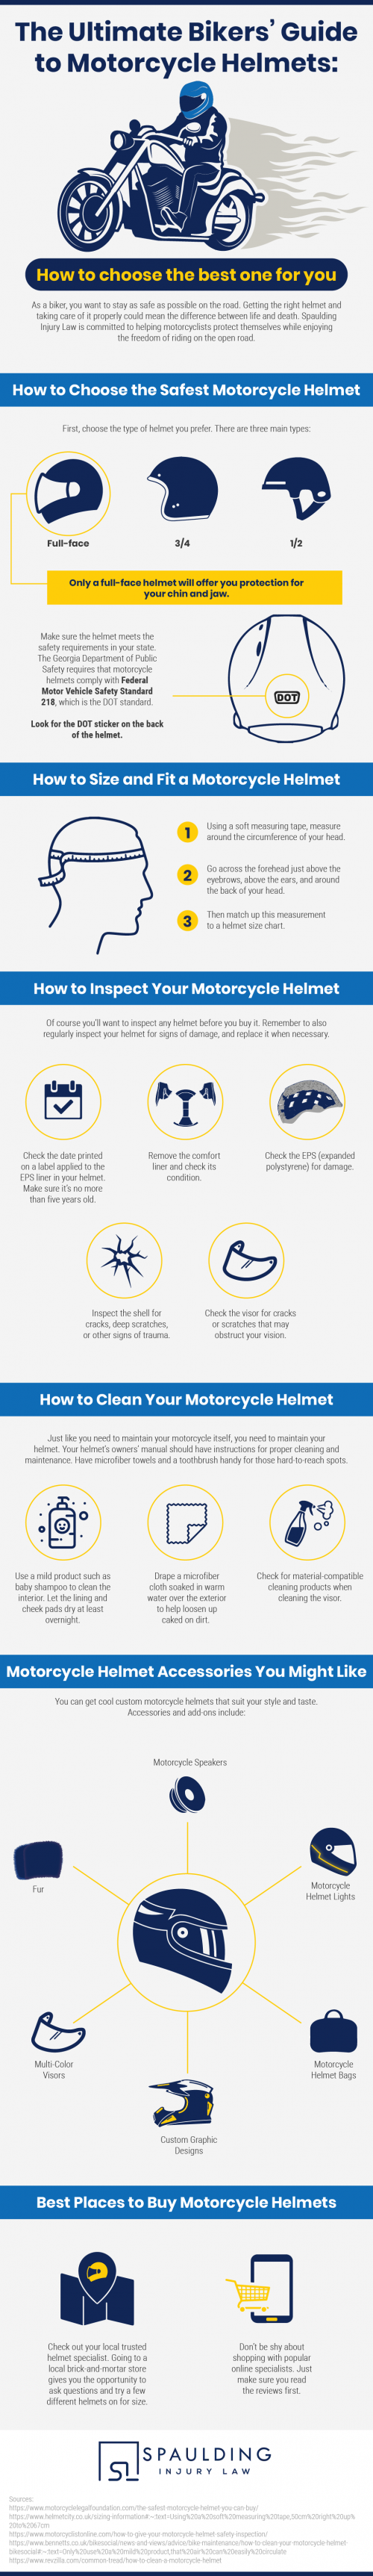 "The Ultimate Bikers’ Guide to Motorcycle Helmets: How to Choose the Best One for You

Riding a motorcycle is an exciting way to travel. The downside is that, motorcycle riders are at serious risk for catastrophic injuries when they have an accident. Traumatic brain injuries often result from motorcycle crashes.
The rider of a motorcycle is much more susceptible to brain injuries and other bodily harm than the driver of a car. Cars have metal, plastic, and fiberglass that can protect their drivers. Motorcyclists have nothing to protect them but a helmet.
Cars and trucks also have safety features, such as seat belts and airbags, which are not present on motorcycles. As a result, a motorcycle rider tends to suffer far more severe injuries in an accident than an occupant of a car or truck. These motorcyclist’s injuries can involve a long recovery and lost income when time at work is missed.
What to Consider When Selecting a Helmet and How to Maintain It
Because helmets play such an important role in protecting motorcyclists in case of a crash, it is important to select the right one, wear it the right way, and keep it in good shape. To help with this process, Spaulding Injury Law has prepared an informative infographic that spells out the basic considerations when it comes to motorcycle helmets.
Check out the infographic on this page for information on choosing the right type of helmet, making sure it fits properly, how to inspect and maintain your helmet, where to buy a helmet, and more.
Can I Still Recover Compensation If I Was Not Wearing a Helmet?
Many states require every rider on a motorcycle to wear a helmet and protective eyewear. Wearing a helmet reduces the severity of head injuries in a motorcycle accident. If you weren’t wearing a helmet when an accident occurred, you may wonder whether you can still recover compensation for your injuries.
A plaintiff in a motorcycle accident can still recover compensation even if no helmet was worn. This is because not wearing a helmet does not cause an accident. However, the insurance company for the at-fault driver may use the lack of a helmet to argue for a smaller payout. That’s why you need an attorney who will stand up for your rights. 

Talk to a Motorcycle Accident Lawyer in Georgia
Don’t delay seeking the financial recovery that you need. Contact the Georgia motorcycle accident lawyers of Spaulding Injury Law today to find out more about your legal rights and options.

For more information, kindly visit https://www.spauldinginjurylaw.com/motorcycle-helmets-guide."